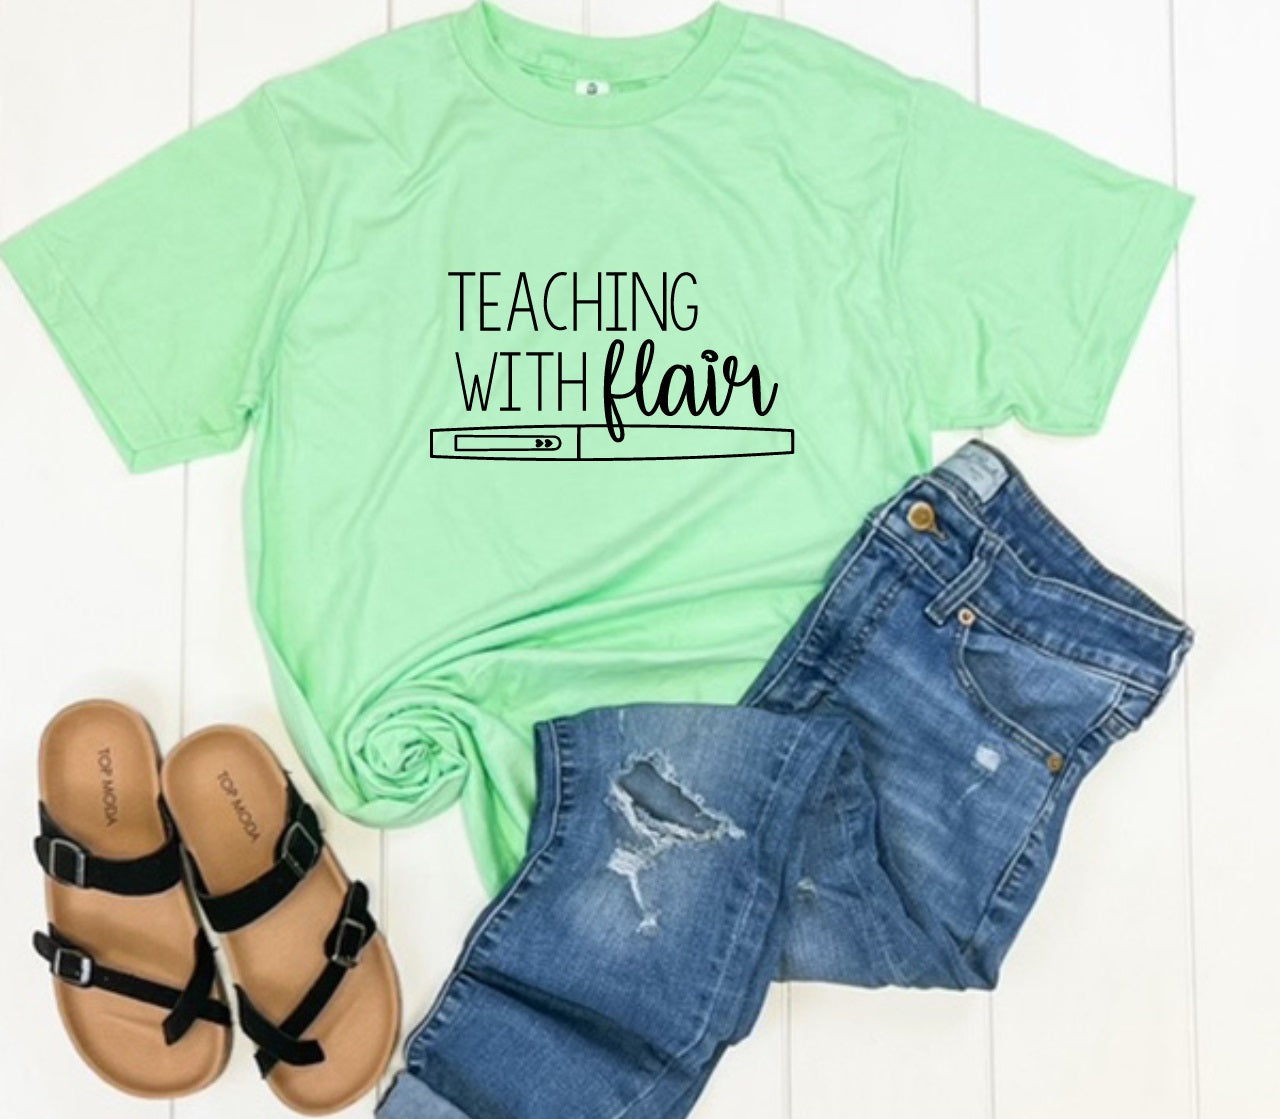 Teaching With Flair-MANY COLORS